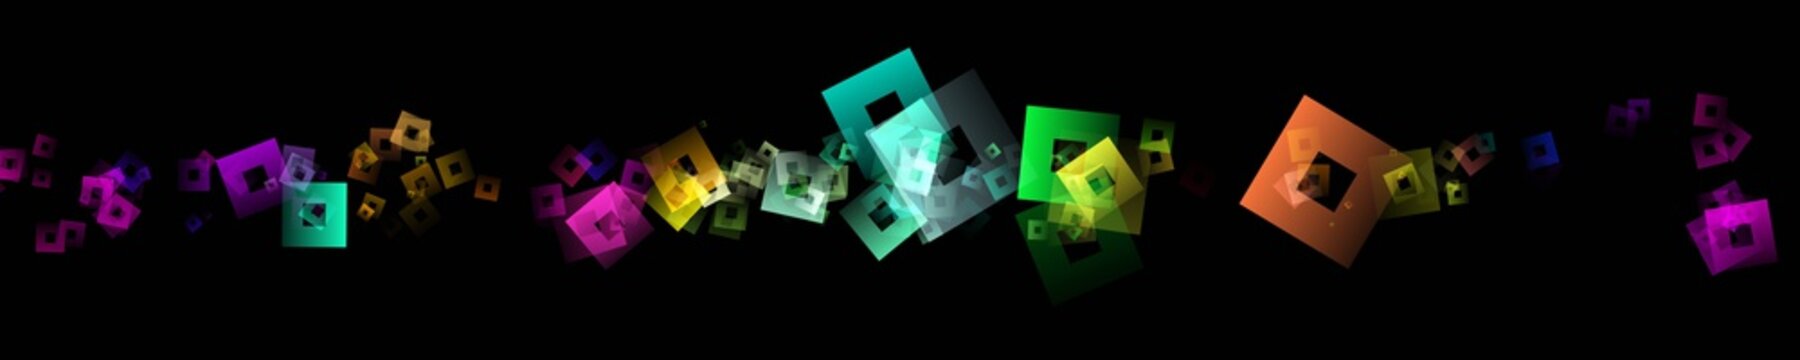 Abstract square panorama background design illustration